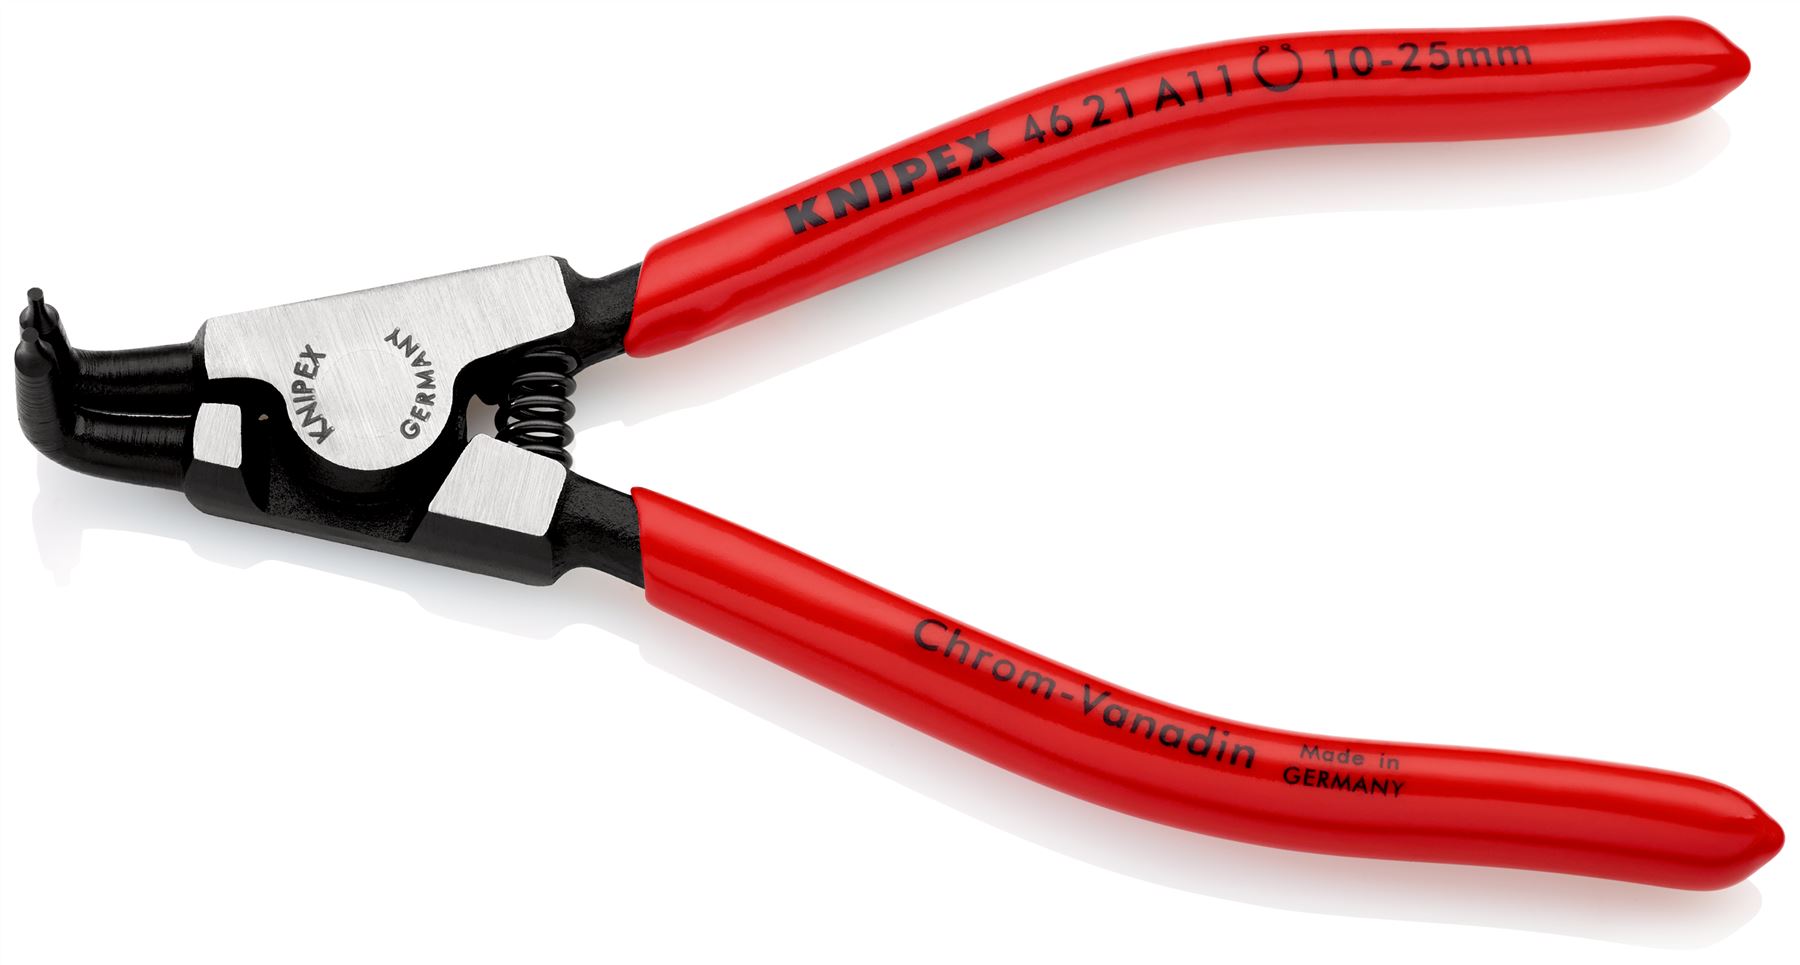 KNIPEX Circlip Pliers for External Circlips on Shafts 90° Angled 125mm 1.3mm Diameter Tips 46 21 A11 SB